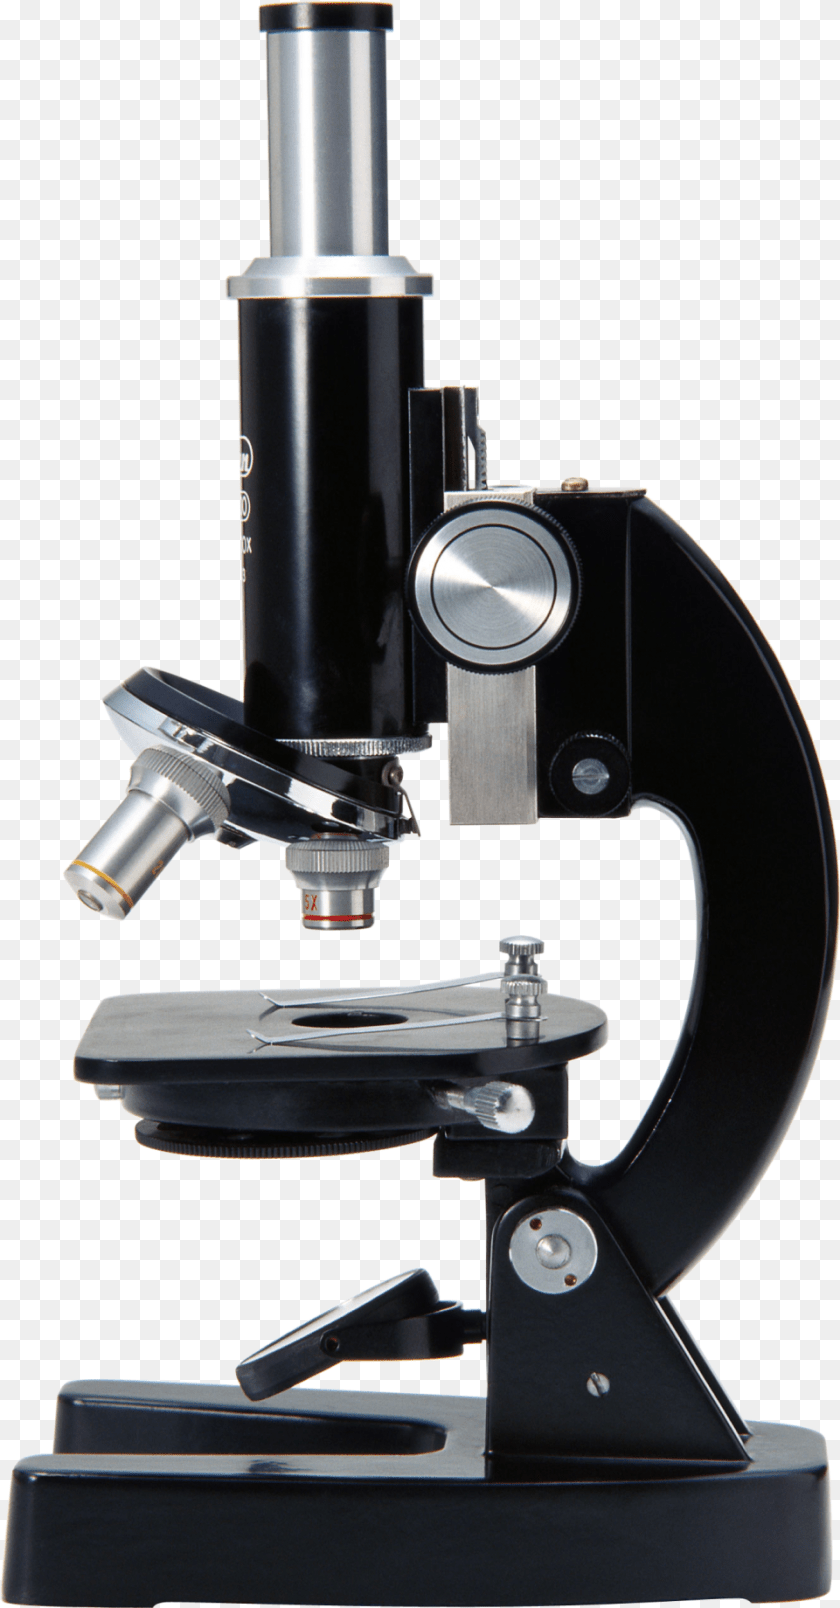 961x1840 Microscope Image Background Microscope Transparent PNG